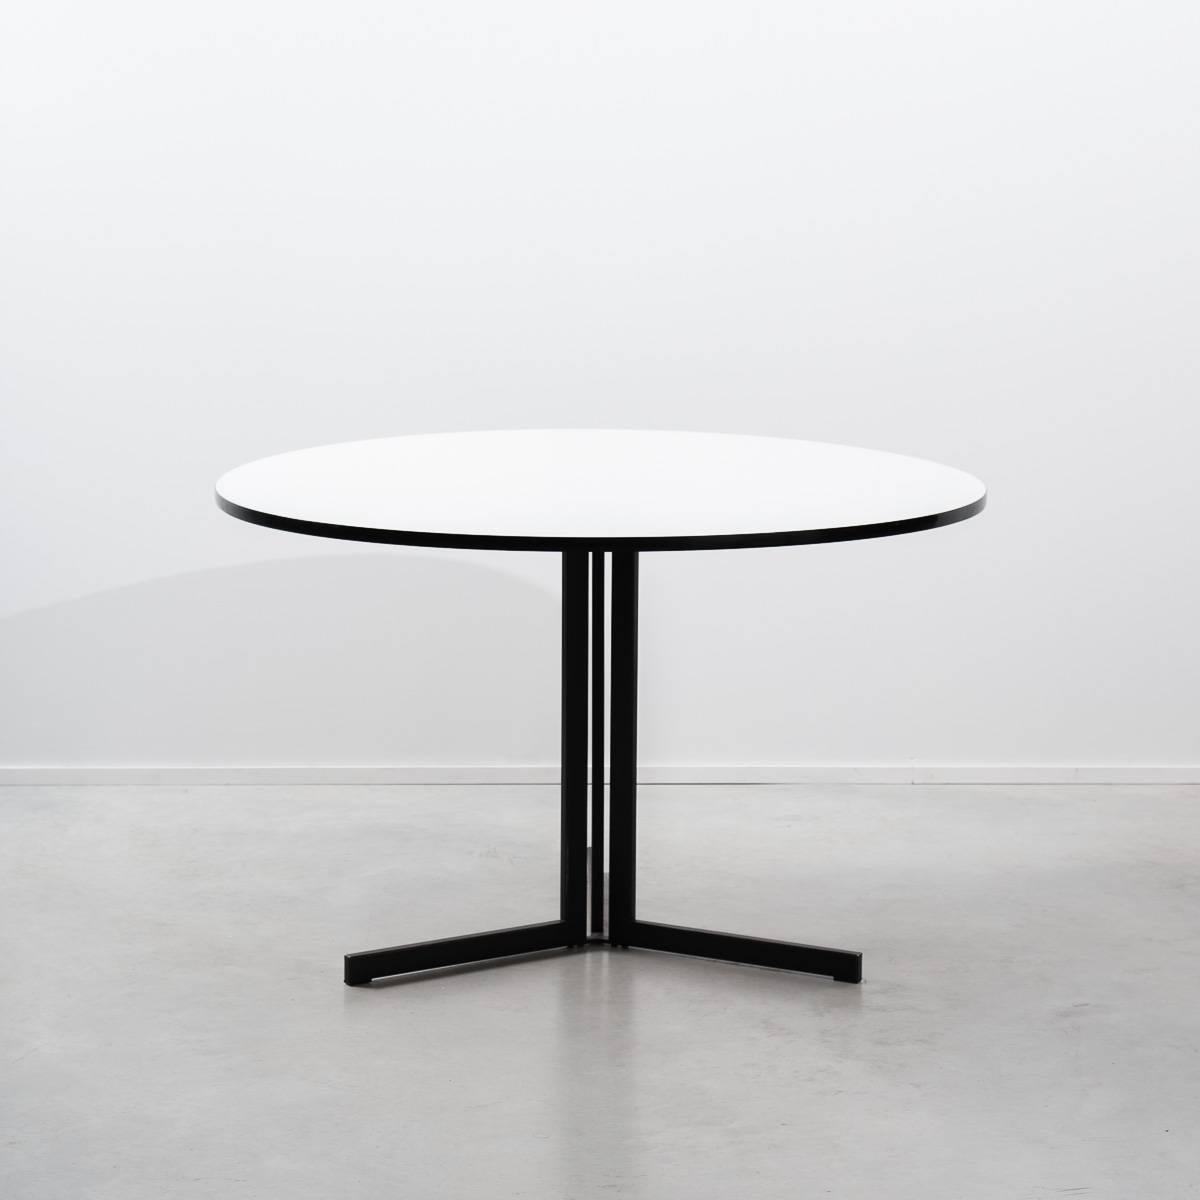 Dutch modern dining table by AP Originals, black metal frame with wooden ends. Off-white Formica round top with black plastic edge.
As editor of the Goed Wonen magazine, Hein Salomonson supported the modern style living in the Netherlands during